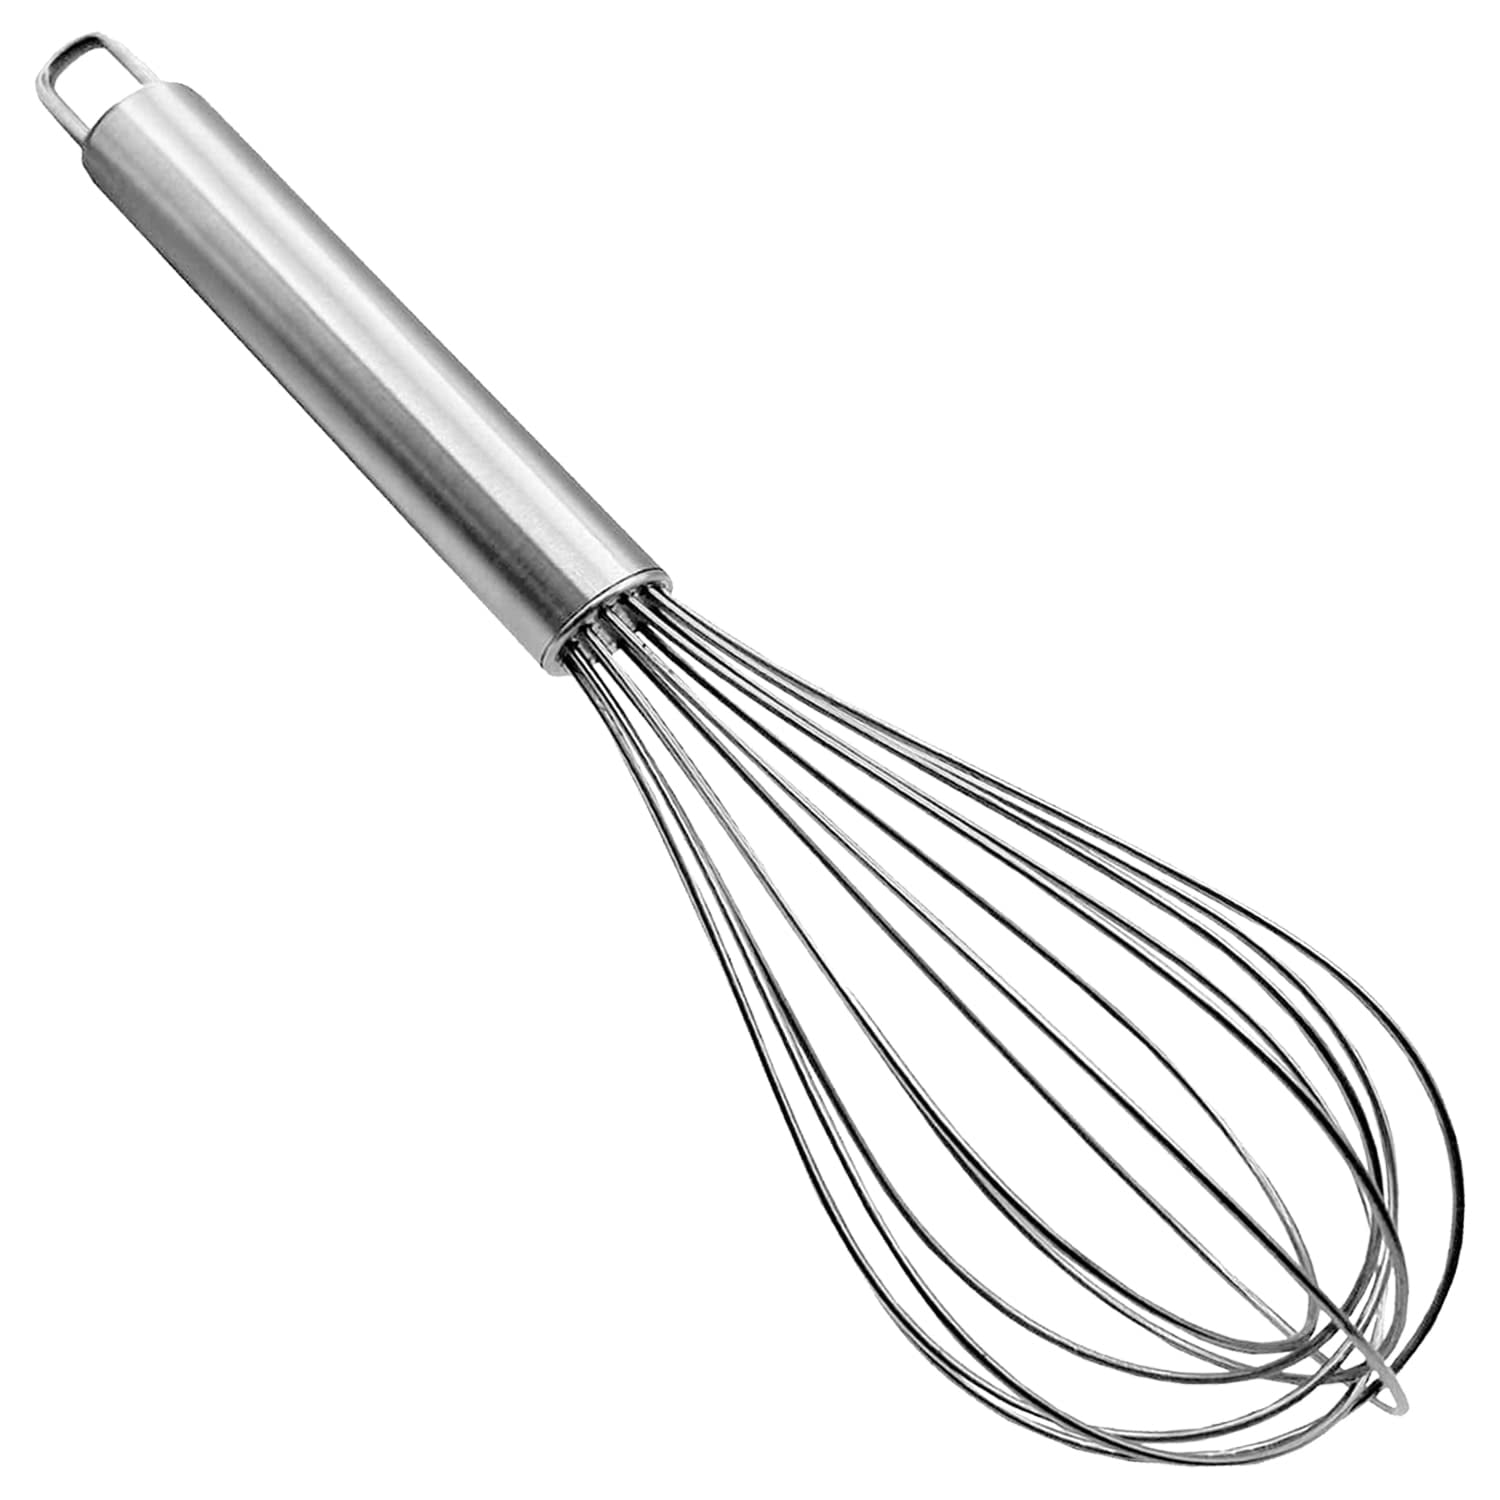 Dream Lifestyle Stainless Steel Balloon Wire Whisk, Heavy Duty Metal Whisks  for Cooking, Hand Mixing Kitchen Tool, Egg Beater, For Stirring, Blending,  Baking, Comfortable Long Handle 